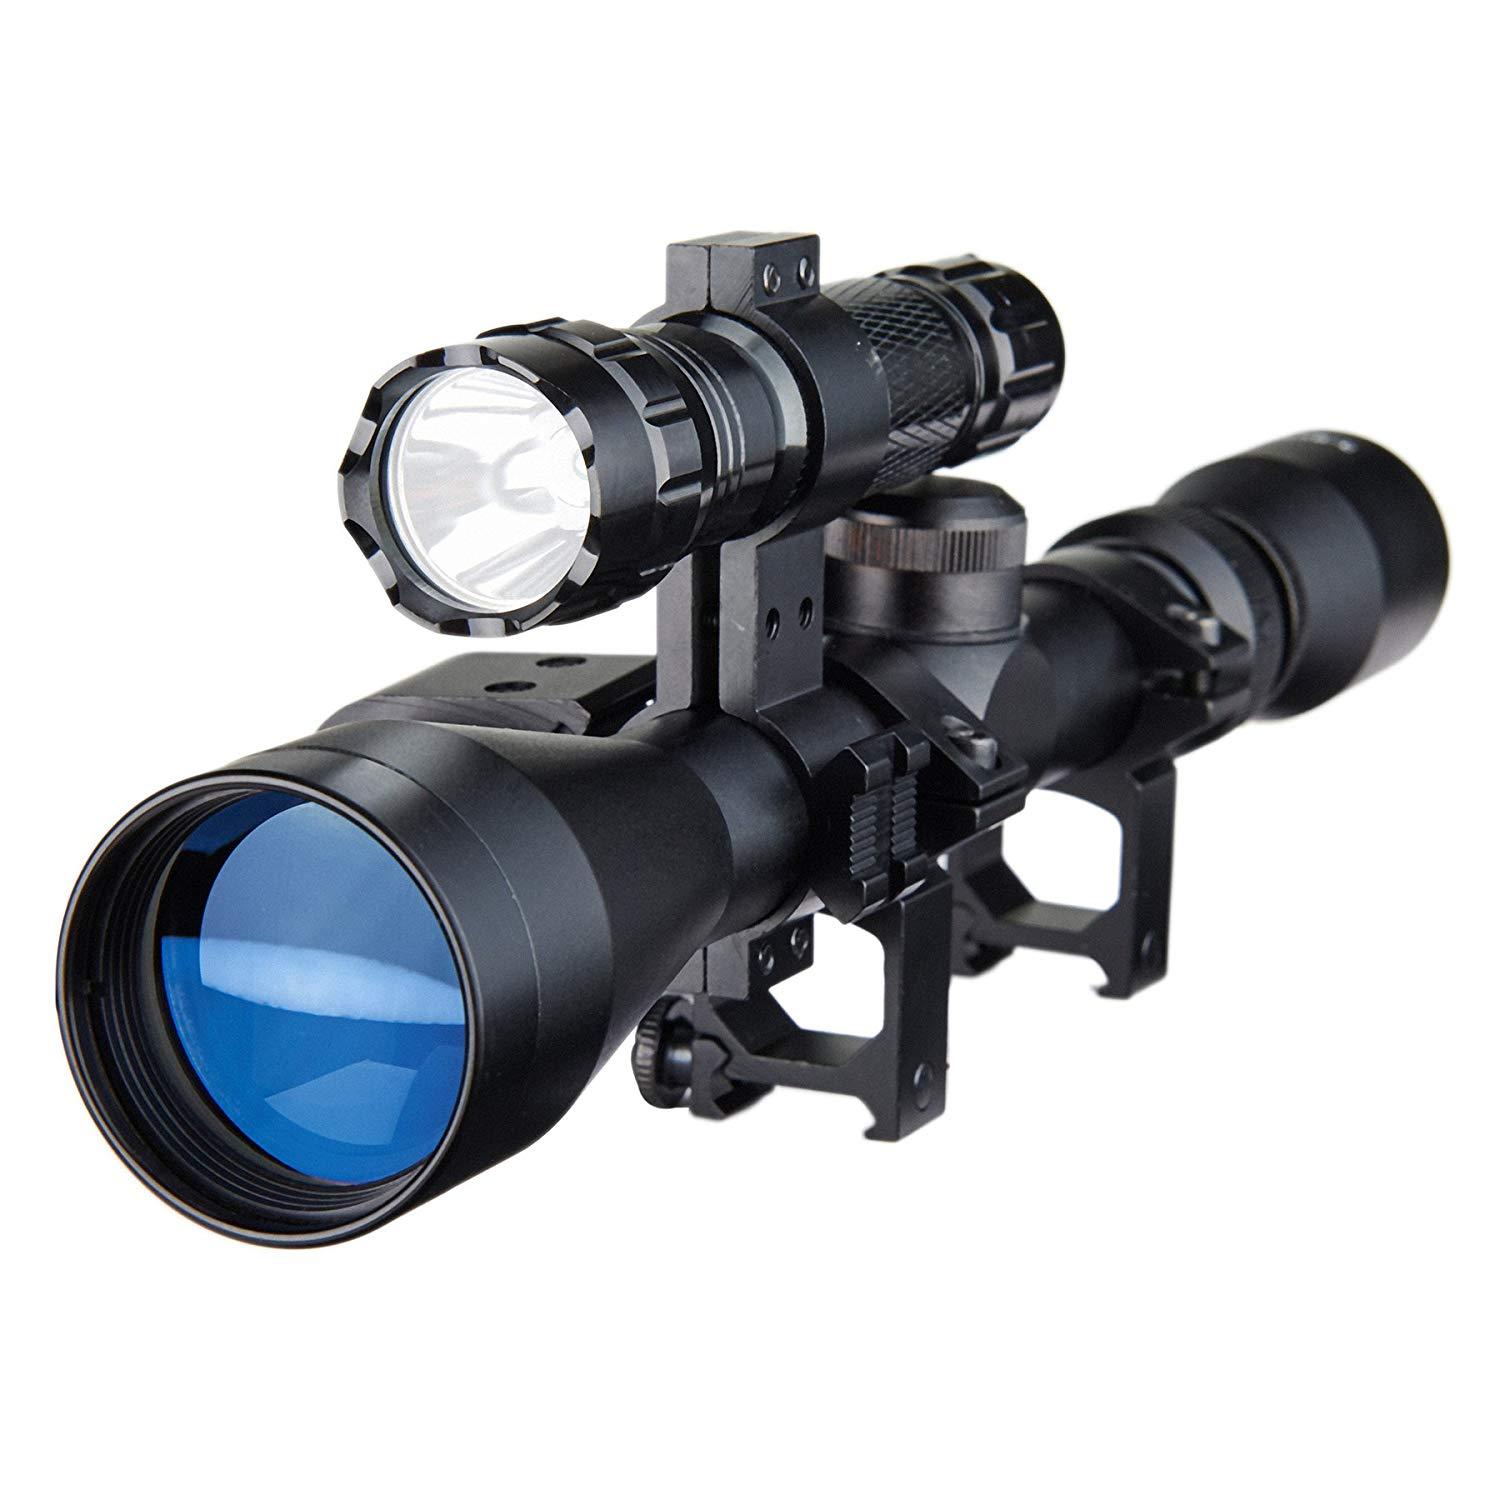 Pinty 3-9X40mm Duplex Optical Hunting Rifle Scope/Red Laser/Torch Combo